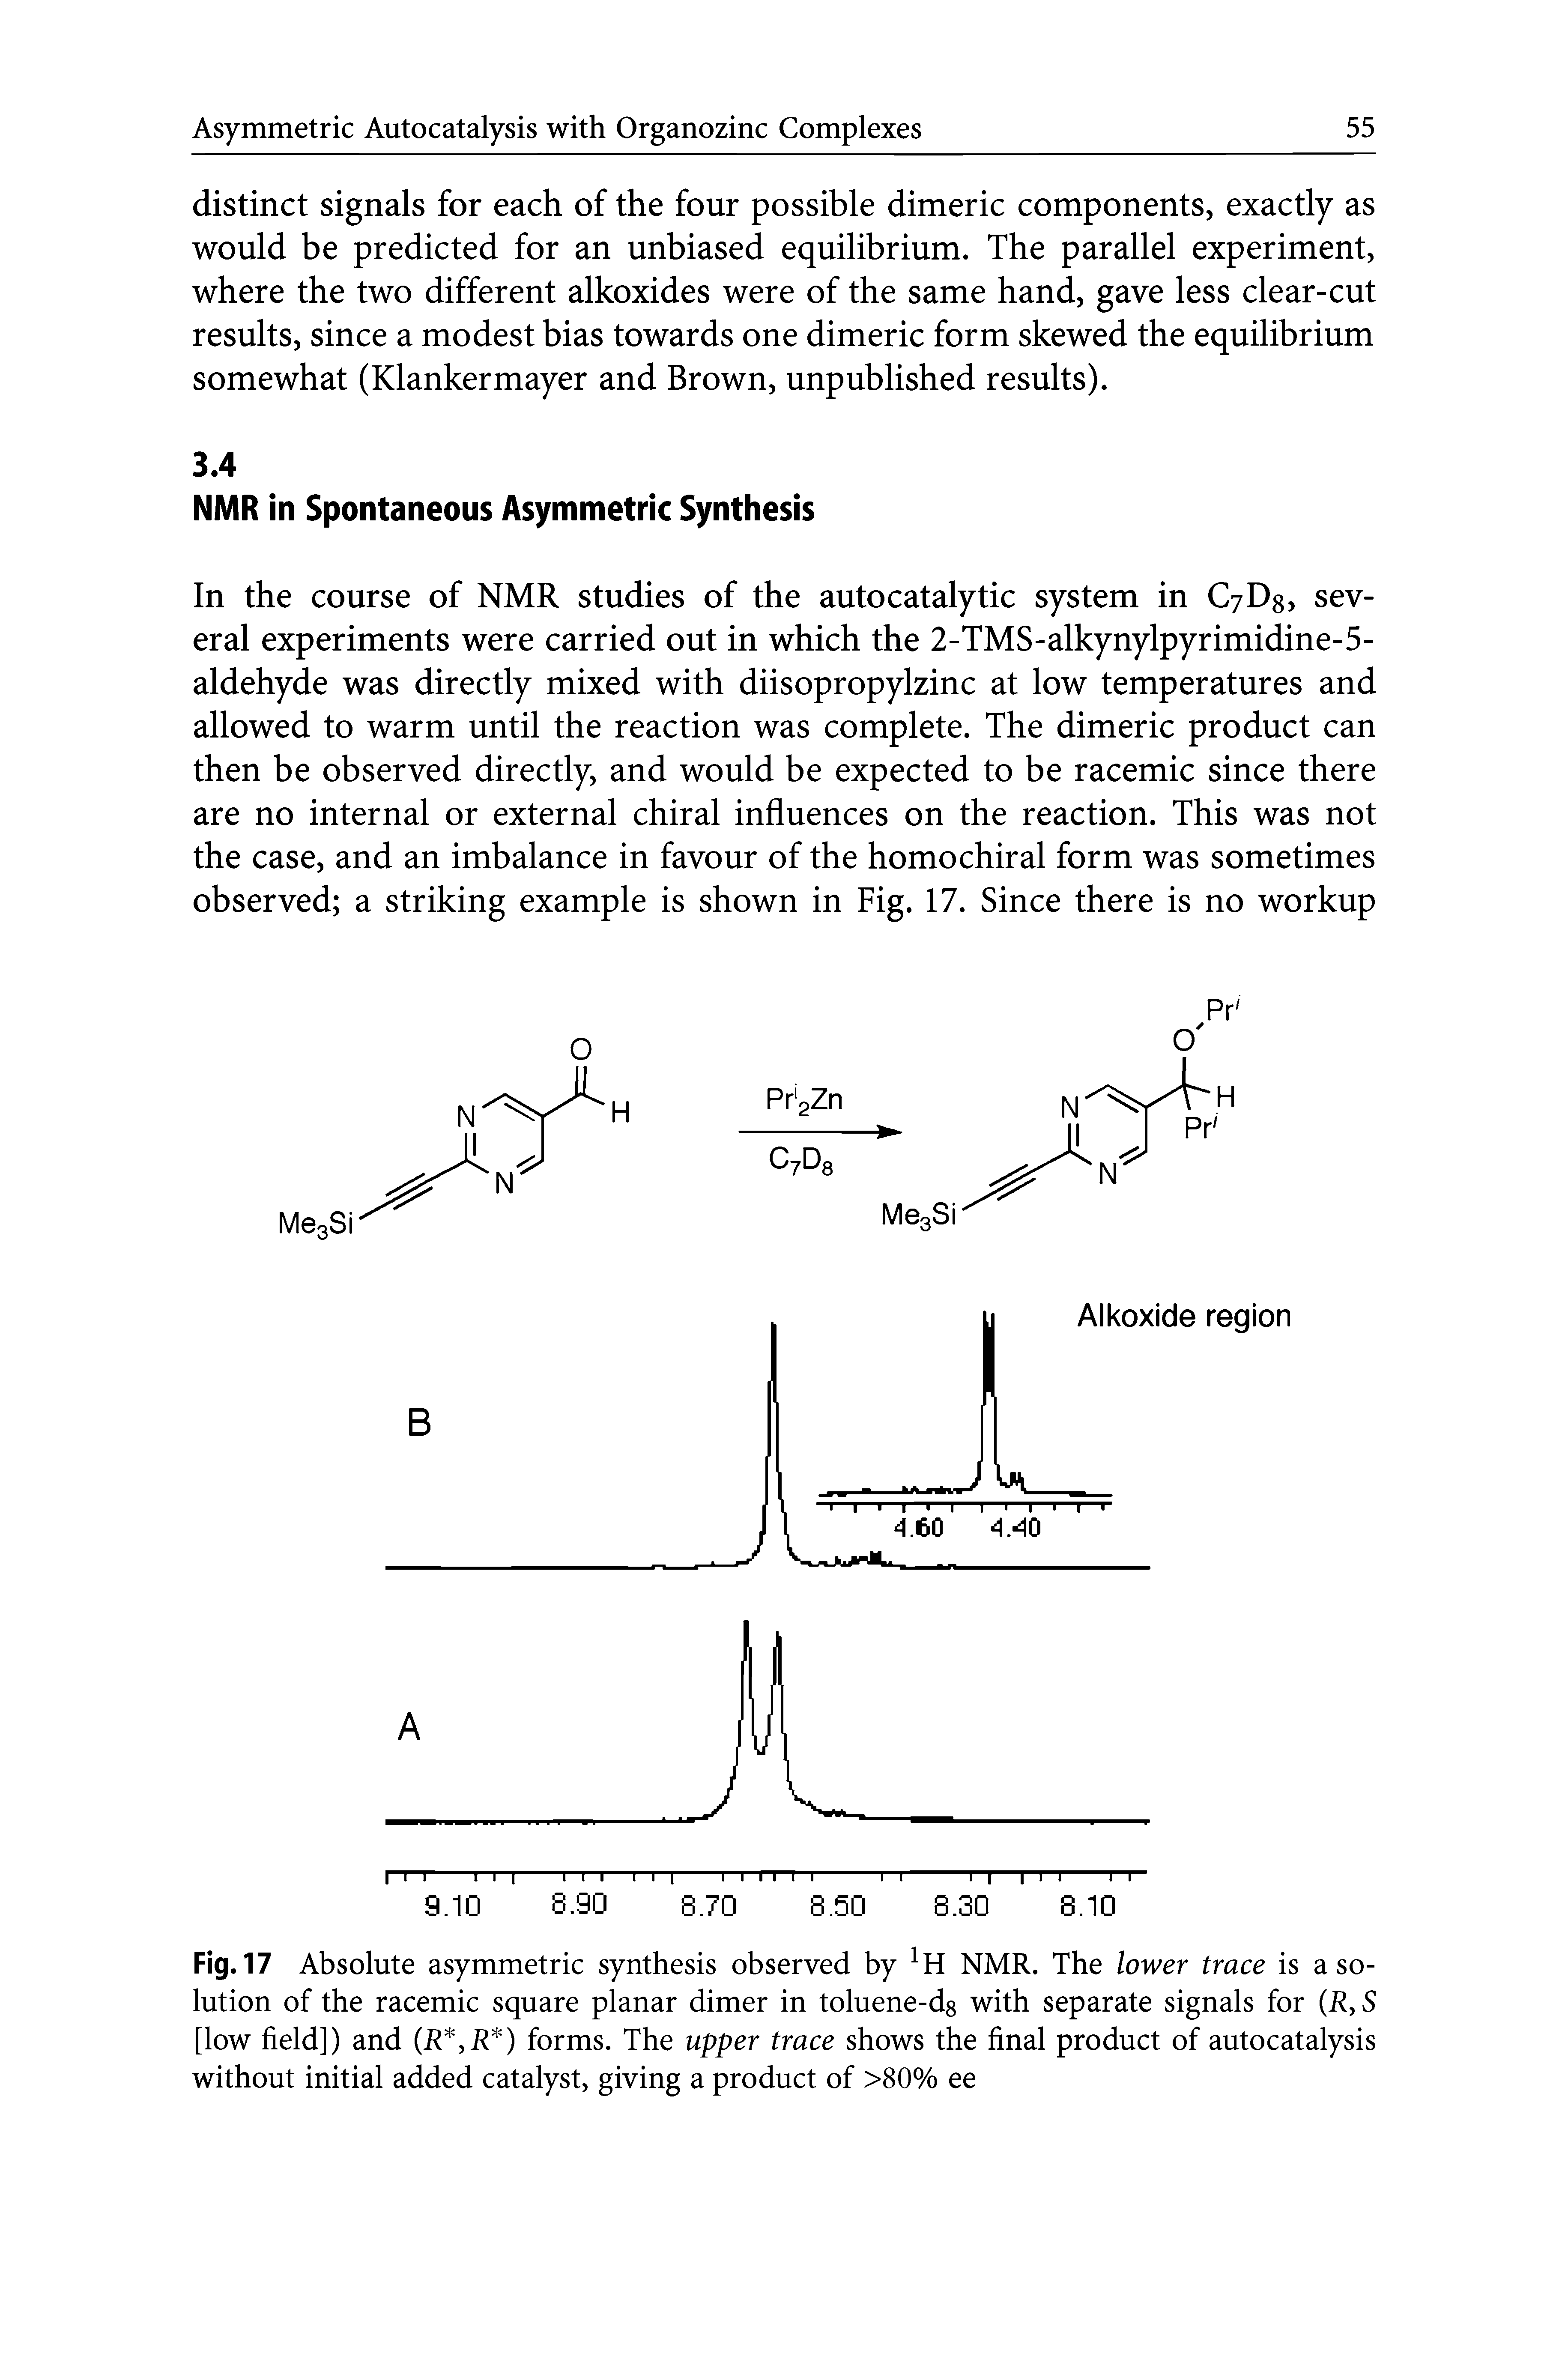 Fig. 17 Absolute asymmetric synthesis observed by 1H NMR. The lower trace is a solution of the racemic square planar dimer in toluene-ds with separate signals for (R, S [low field]) and (R, R ) forms. The upper trace shows the final product of autocatalysis without initial added catalyst, giving a product of >80% ee...